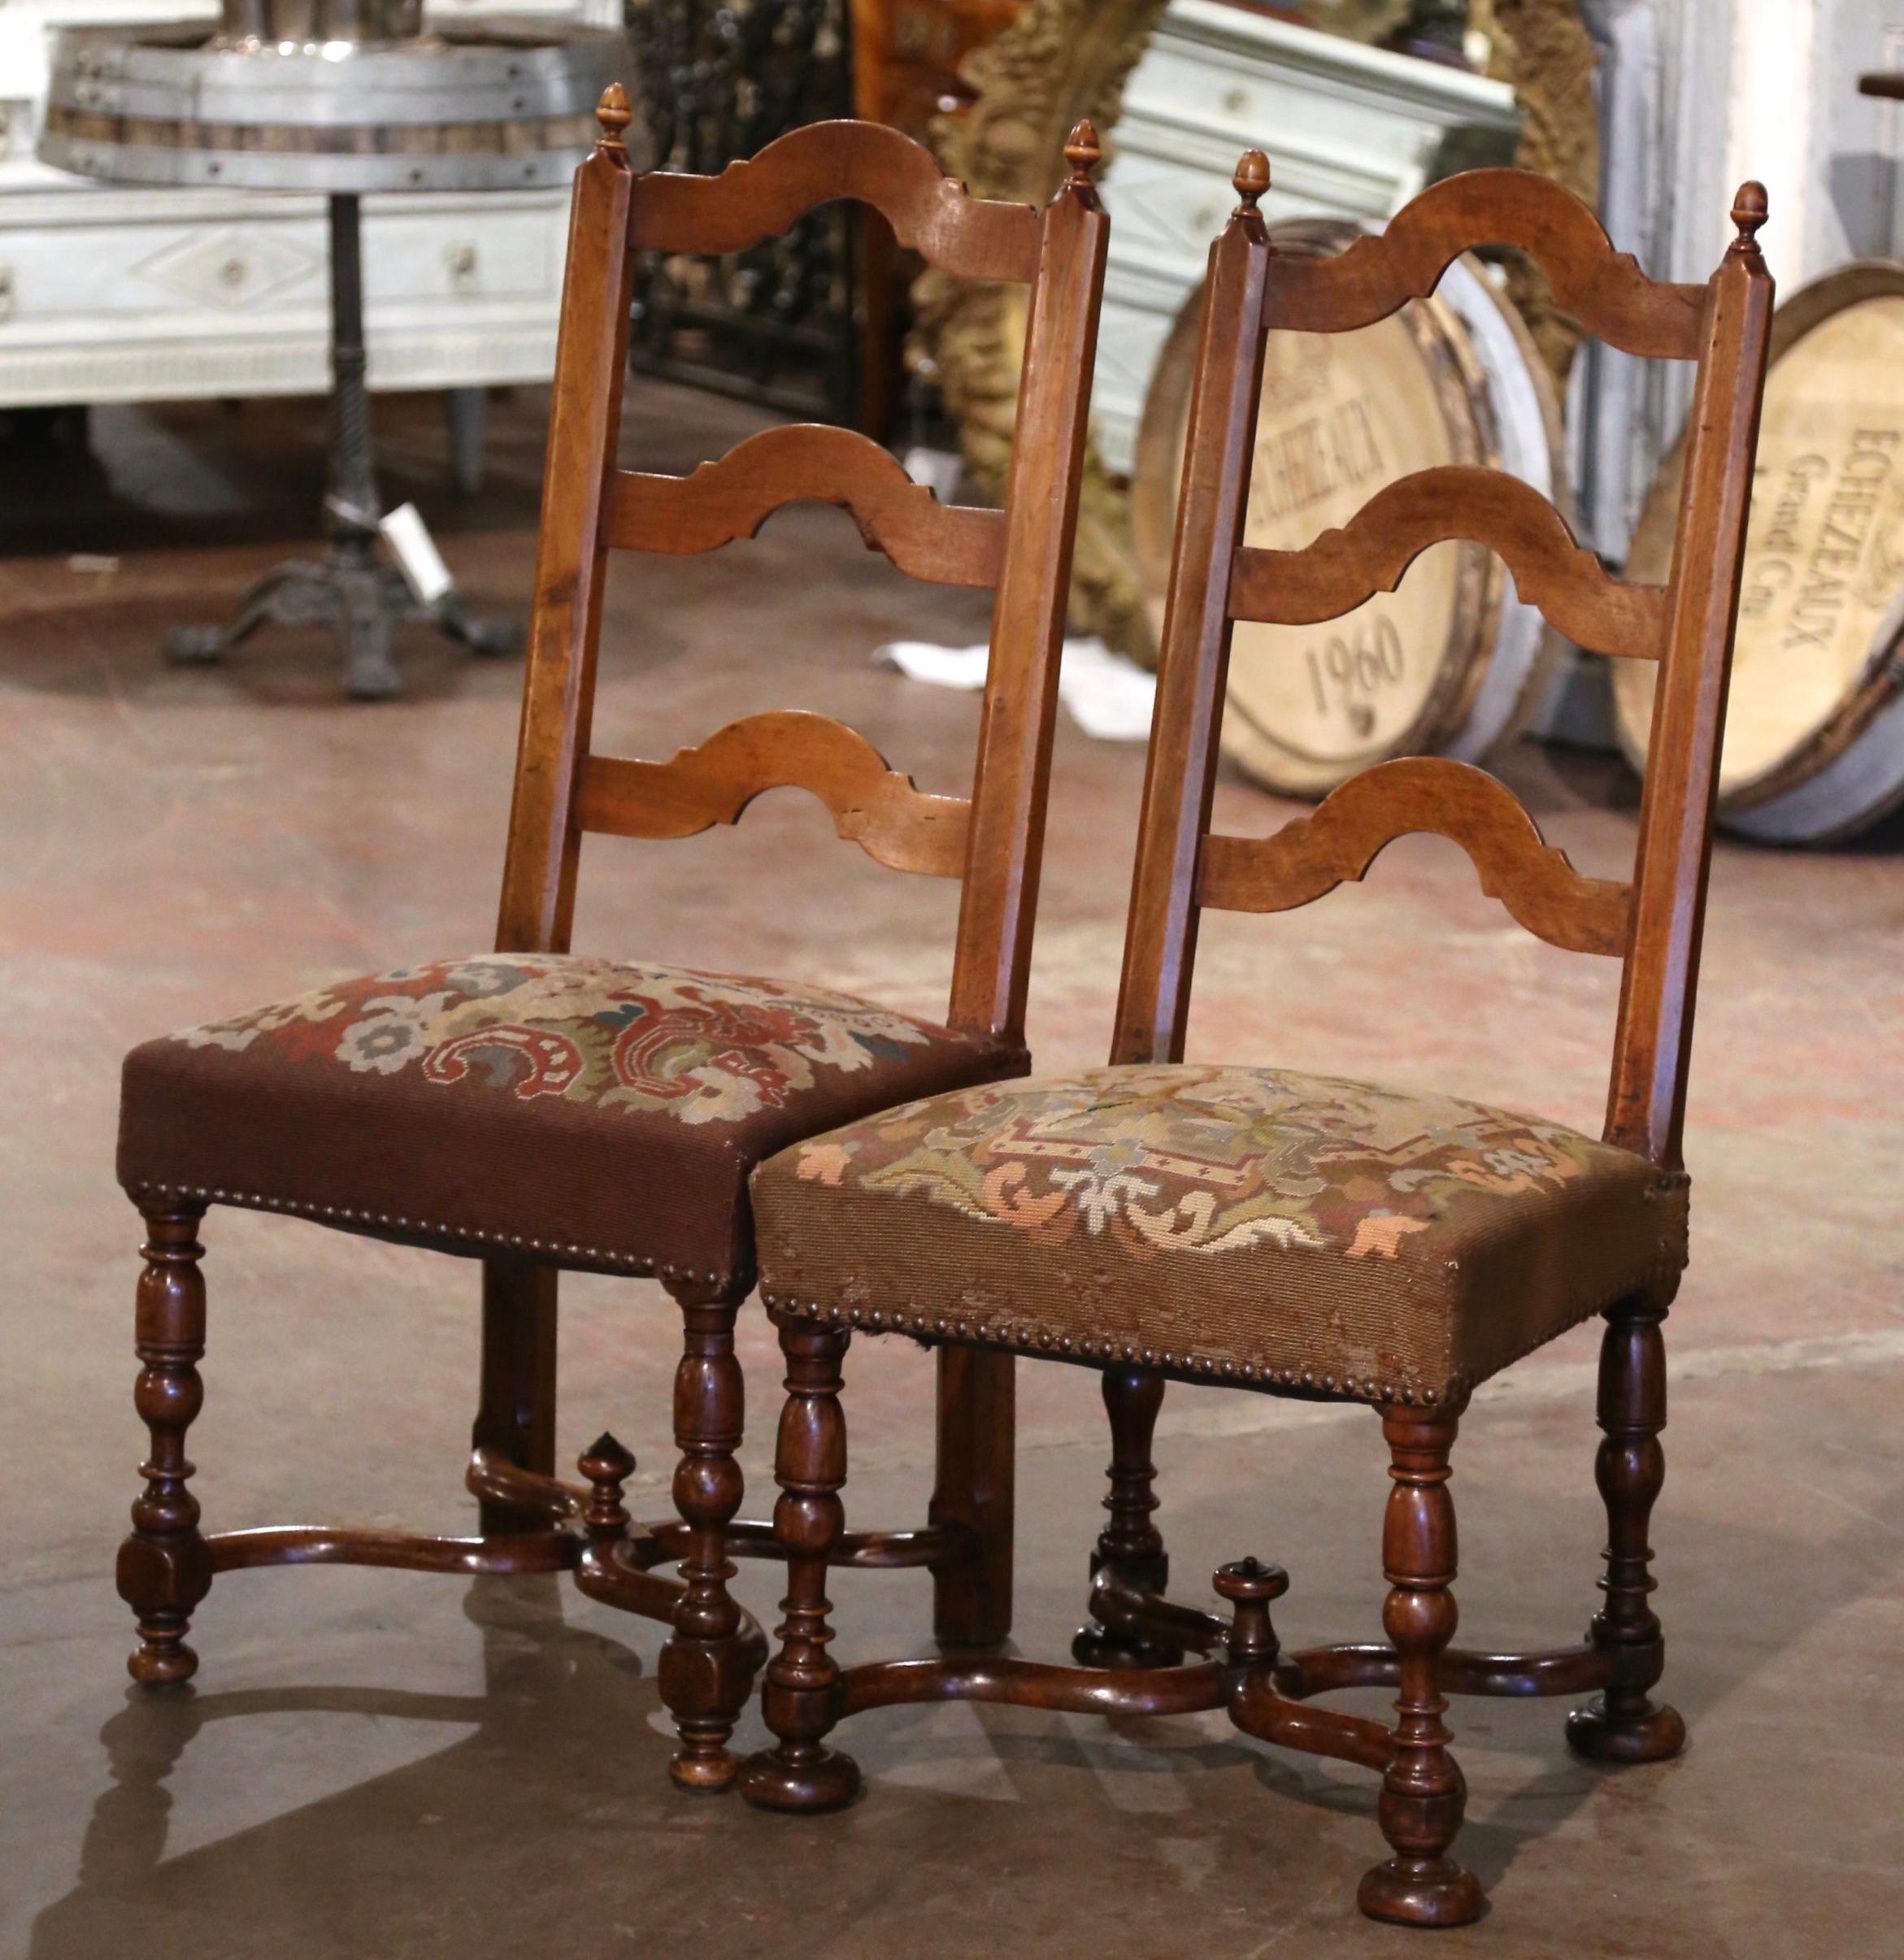 Pair of 19th Century French Carved Walnut Chairs with Needlepoint Upholstery In Excellent Condition For Sale In Dallas, TX